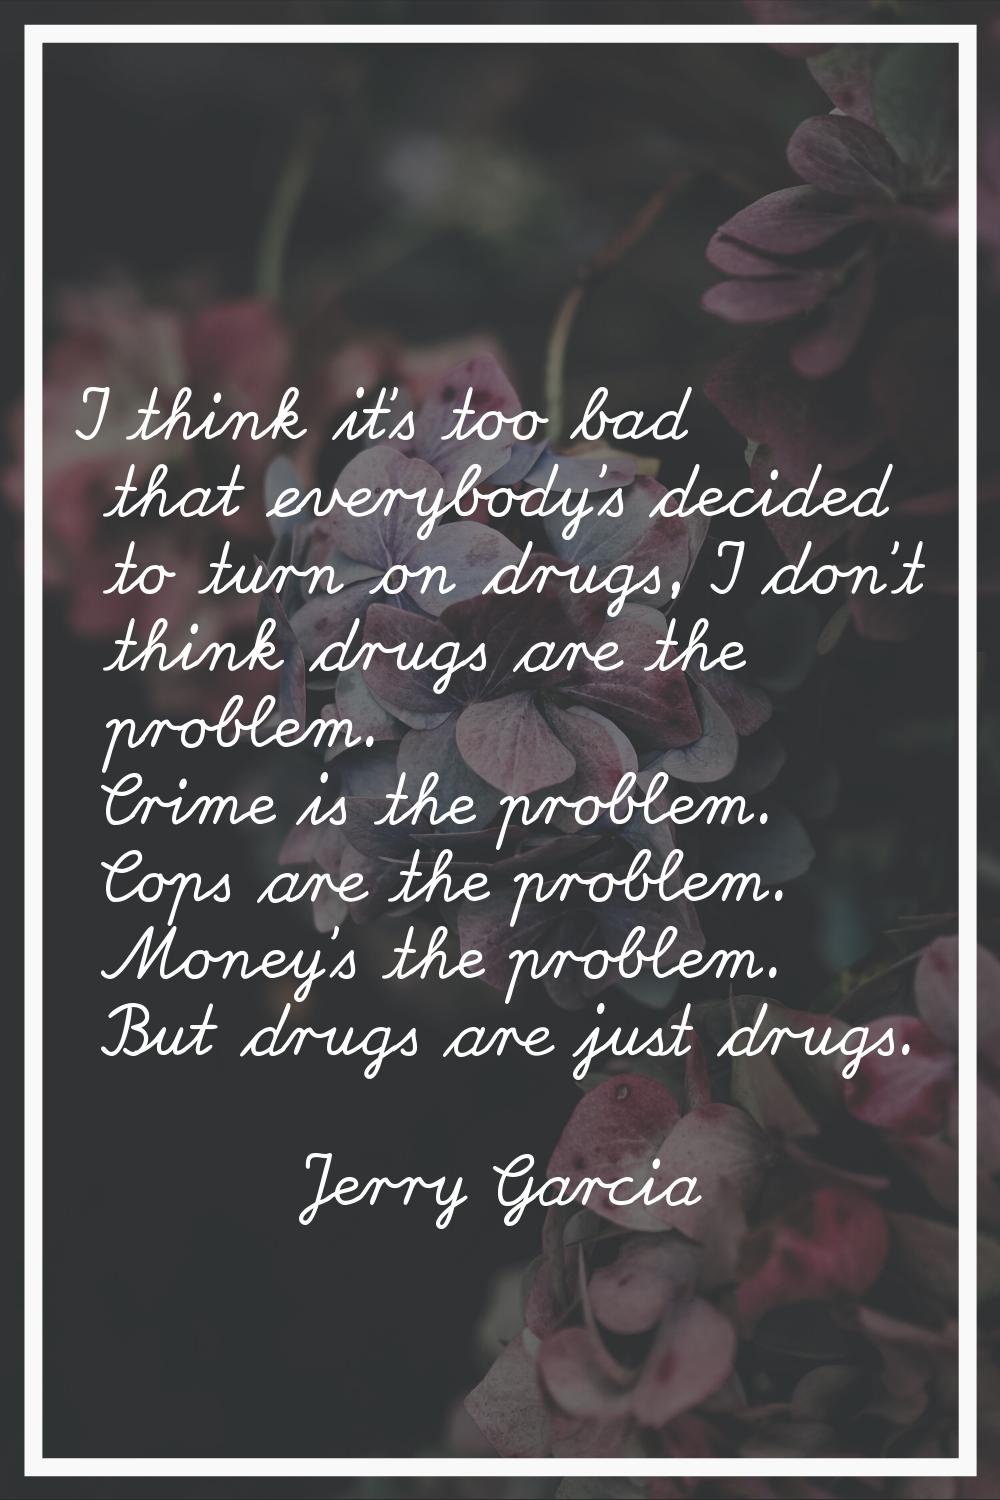 I think it's too bad that everybody's decided to turn on drugs, I don't think drugs are the problem